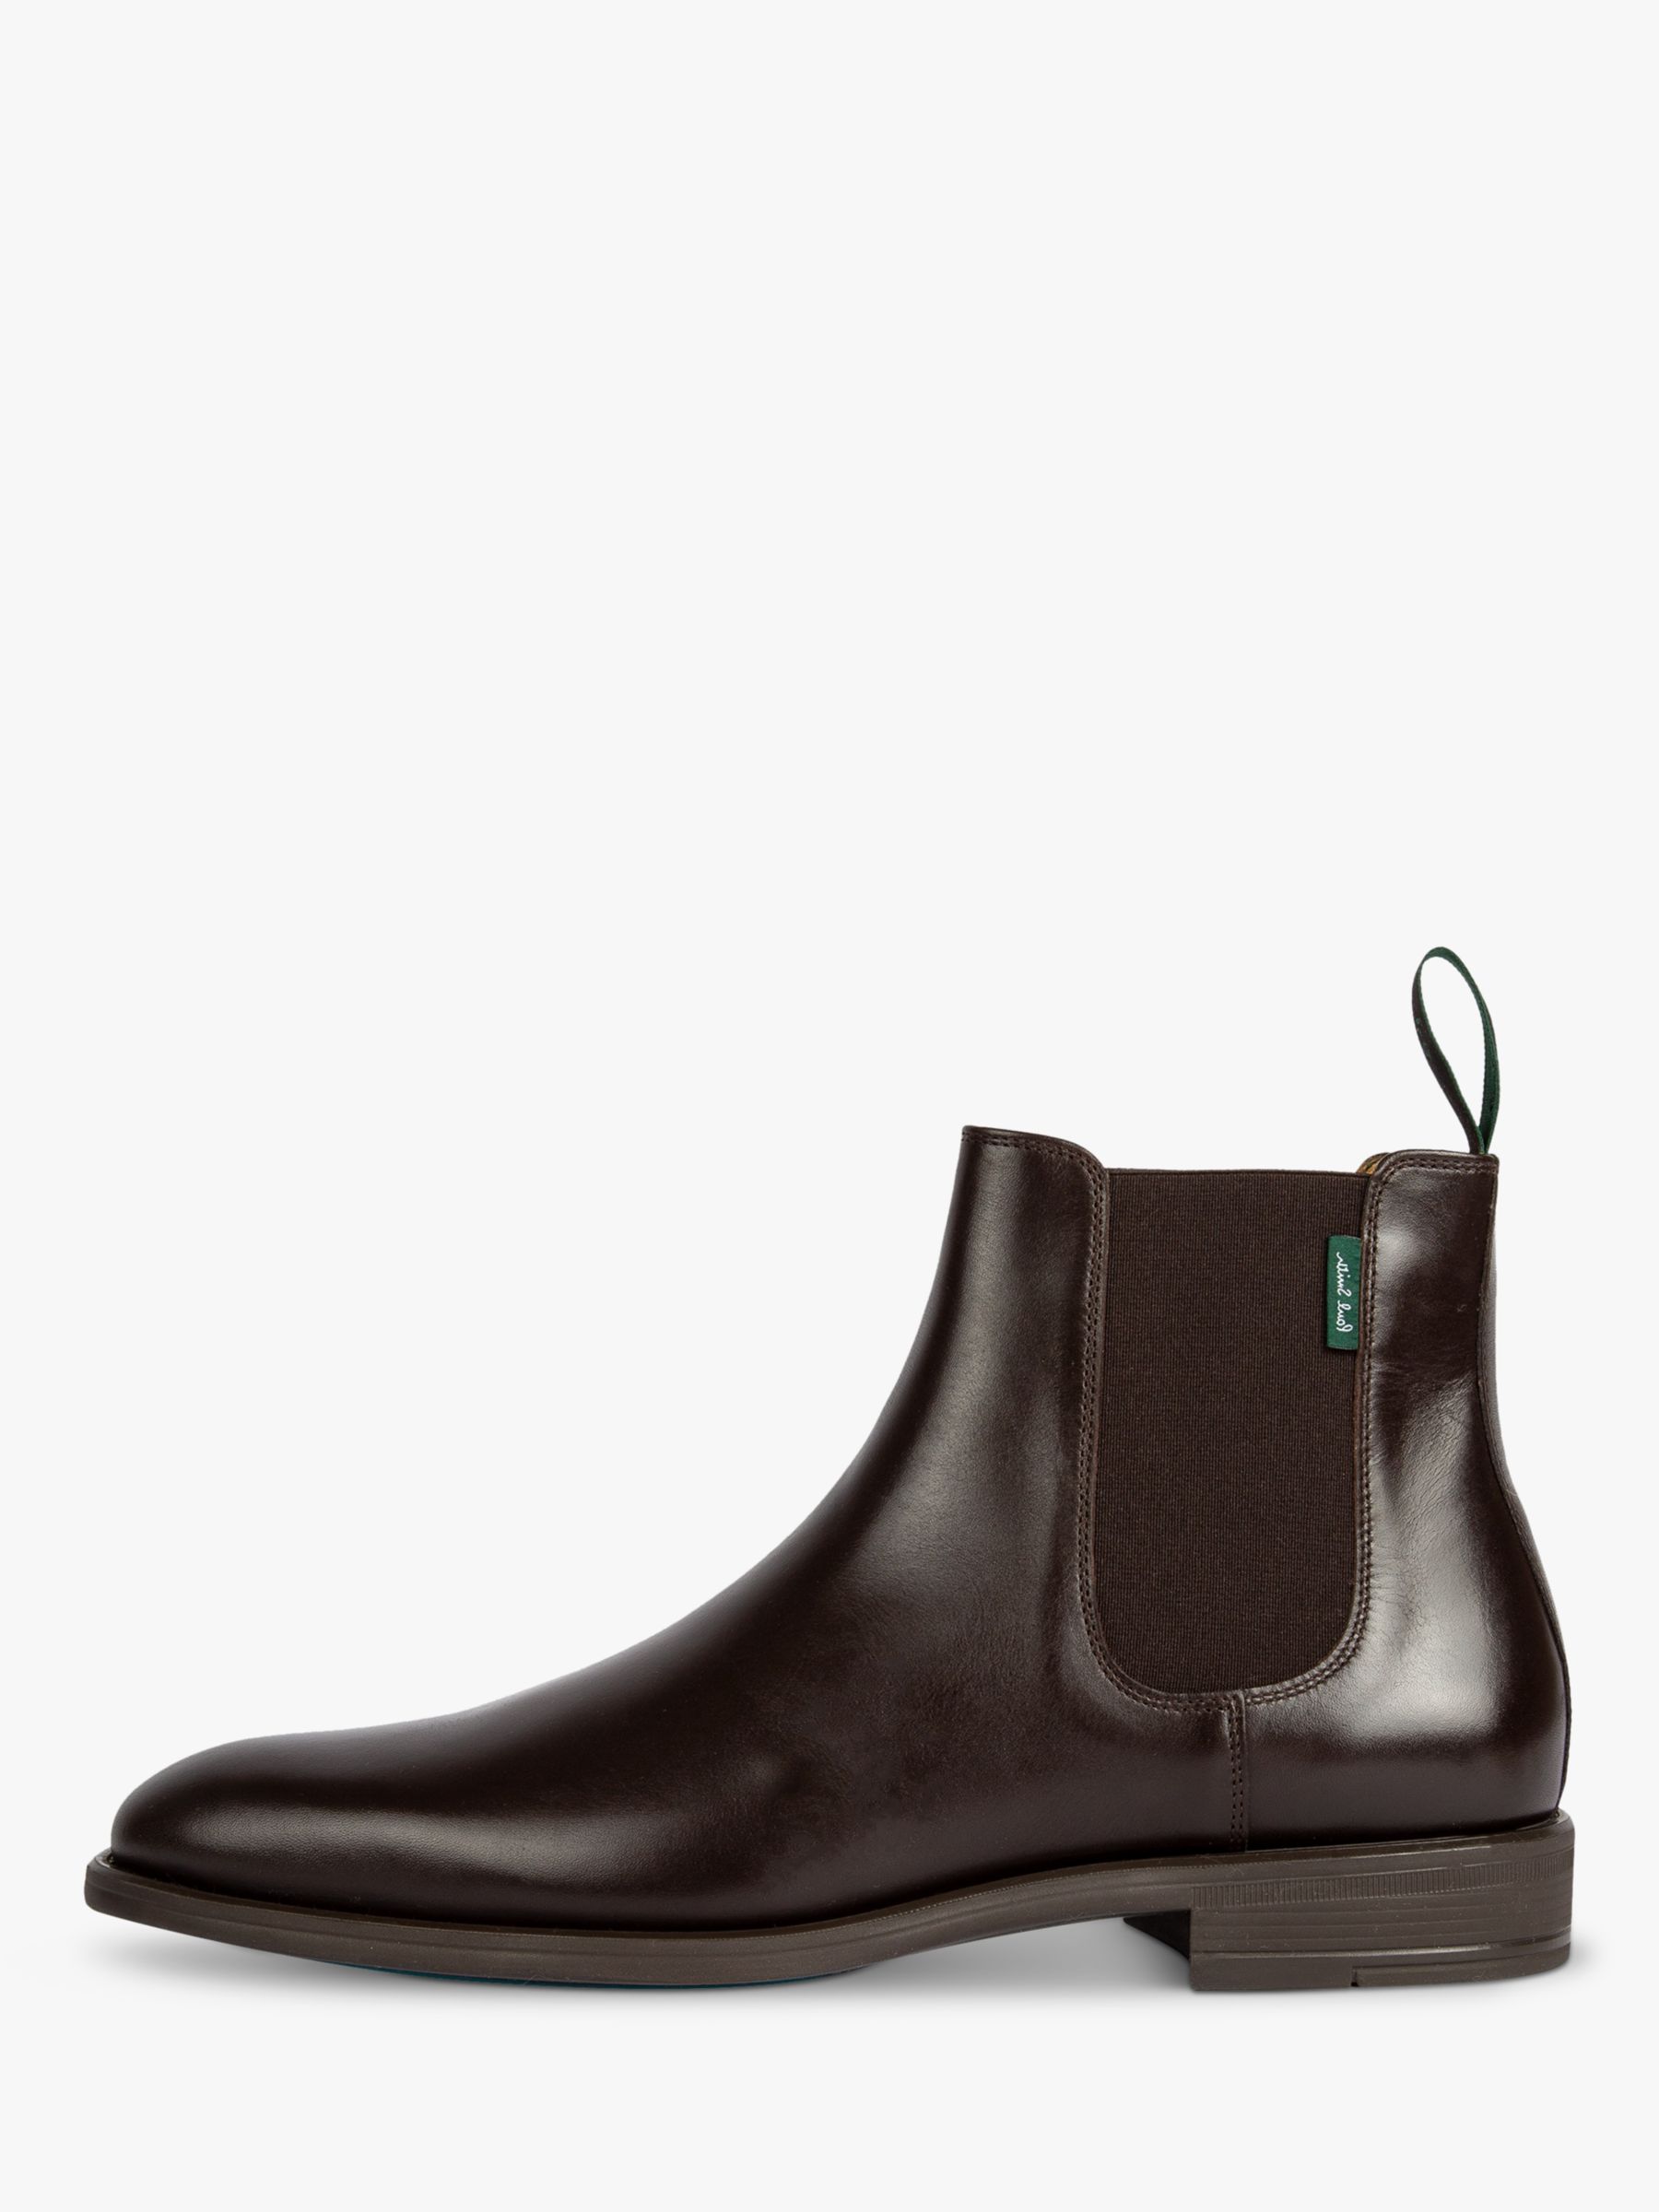 Utallige skab afsnit Paul Smith Cedric Chelsea Boots, Chocolate at John Lewis & Partners